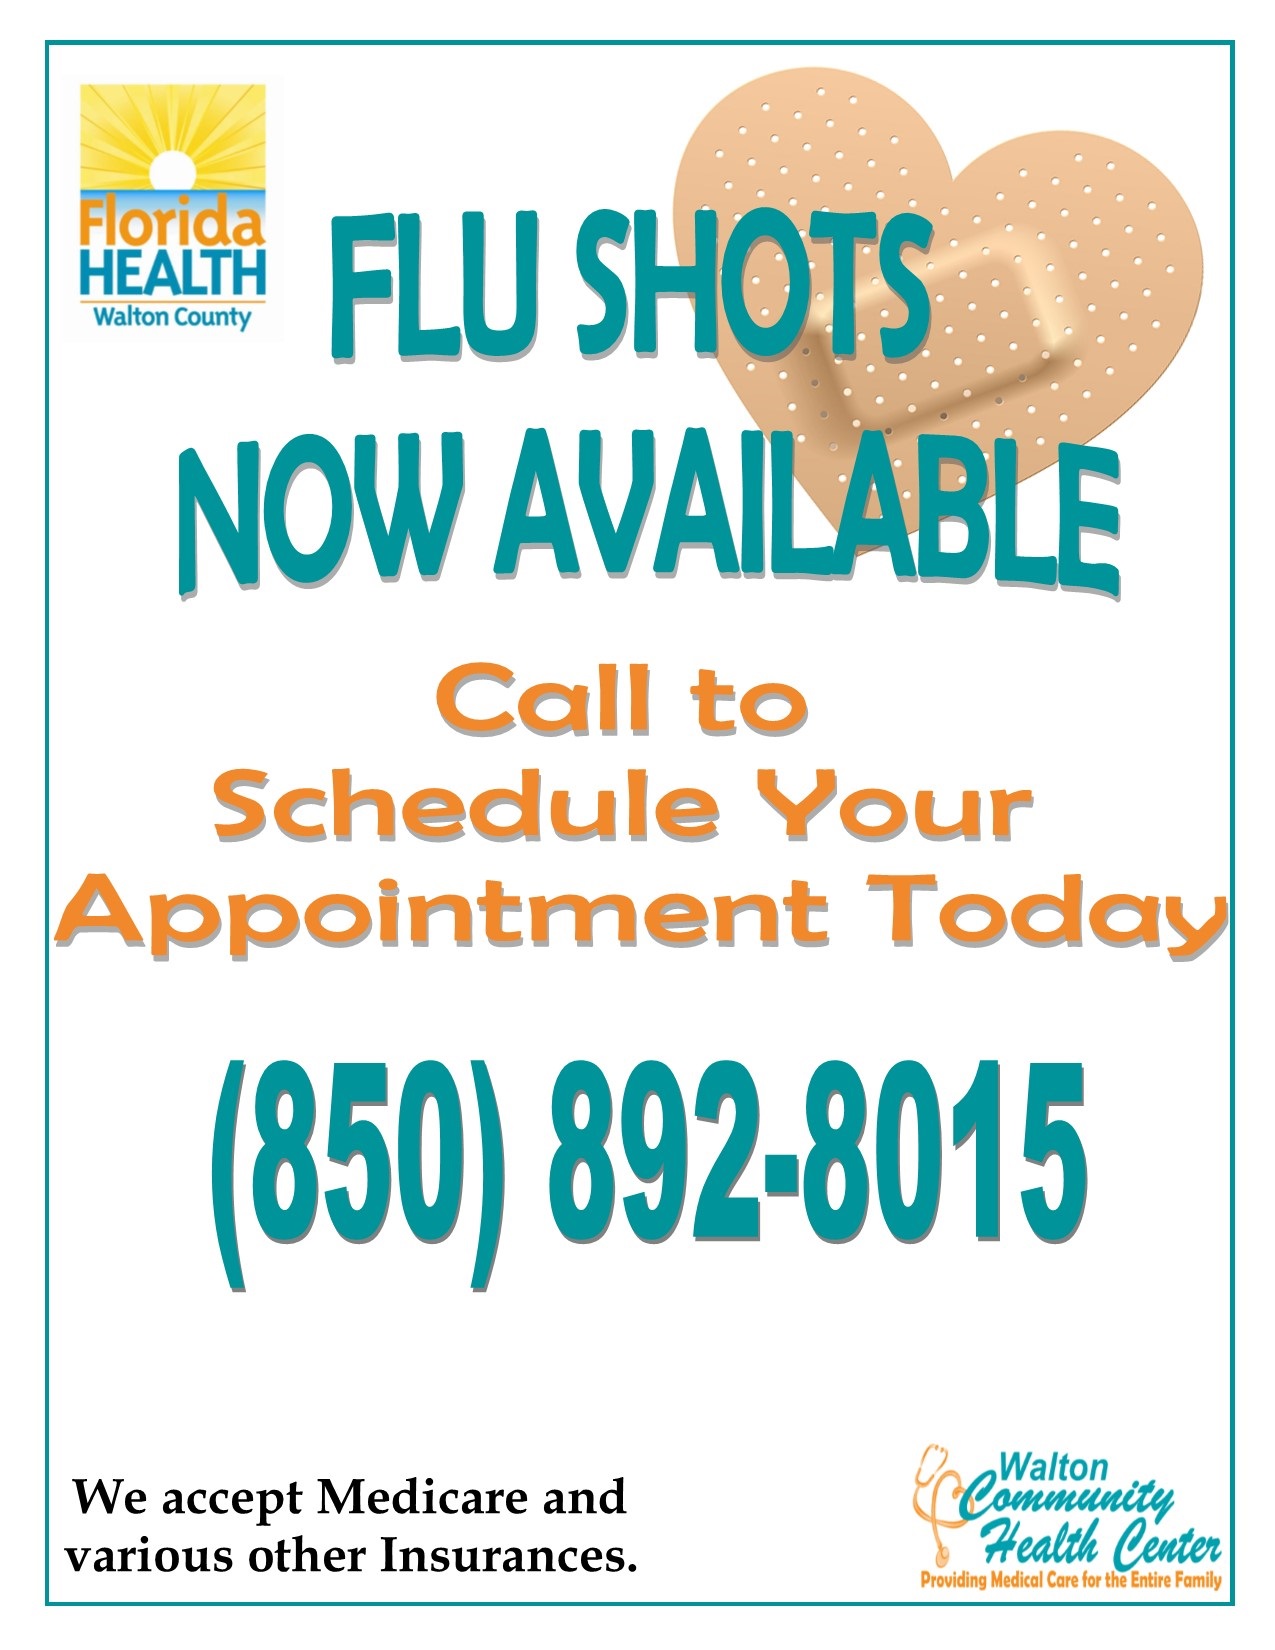 Flu Shots Now Available